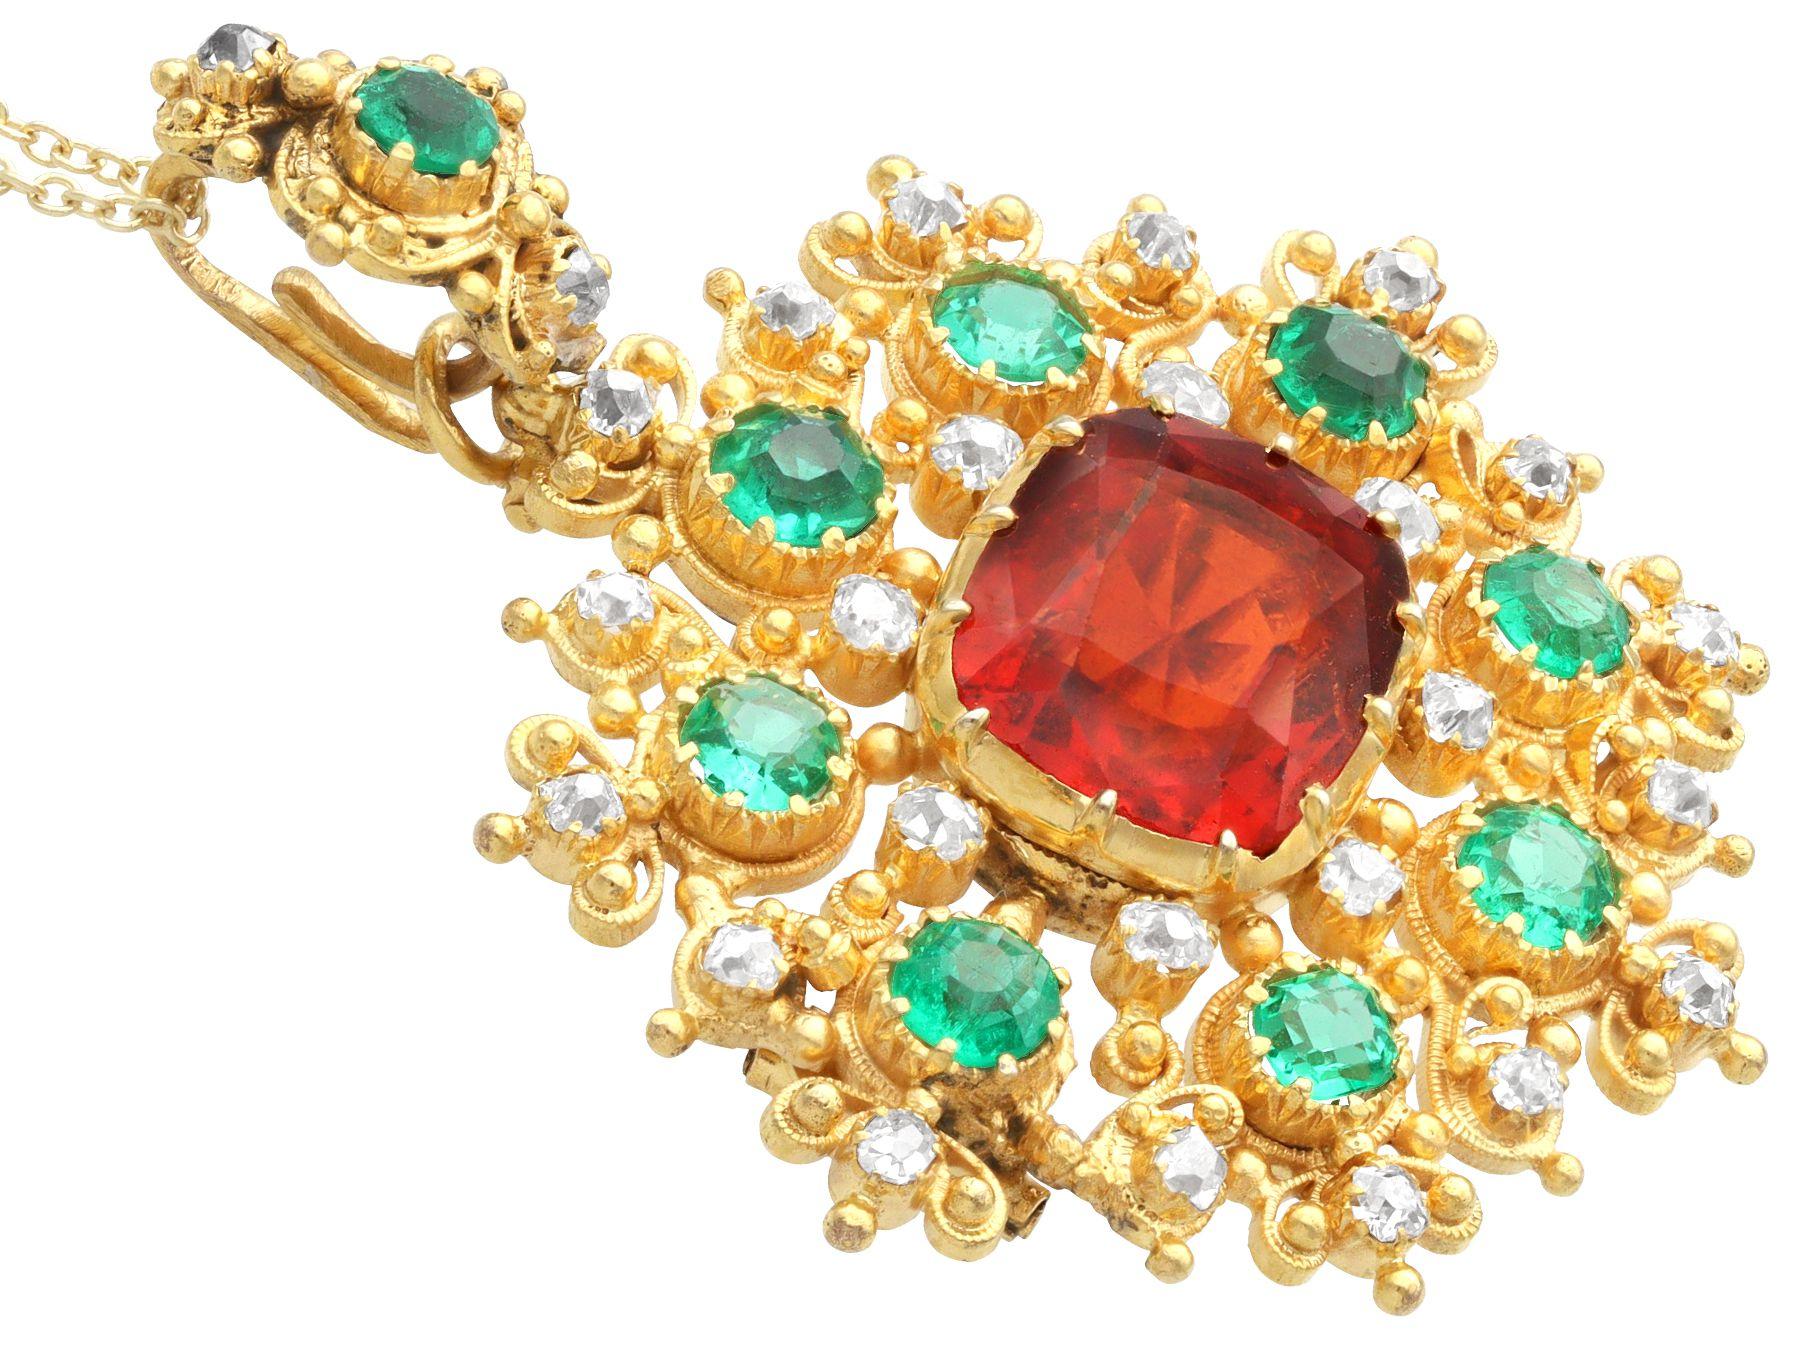 Antique 4.10ct Garnet 1.36ct Emerald and Diamond 18k Yellow Gold Pendant/Brooch In Excellent Condition For Sale In Jesmond, Newcastle Upon Tyne